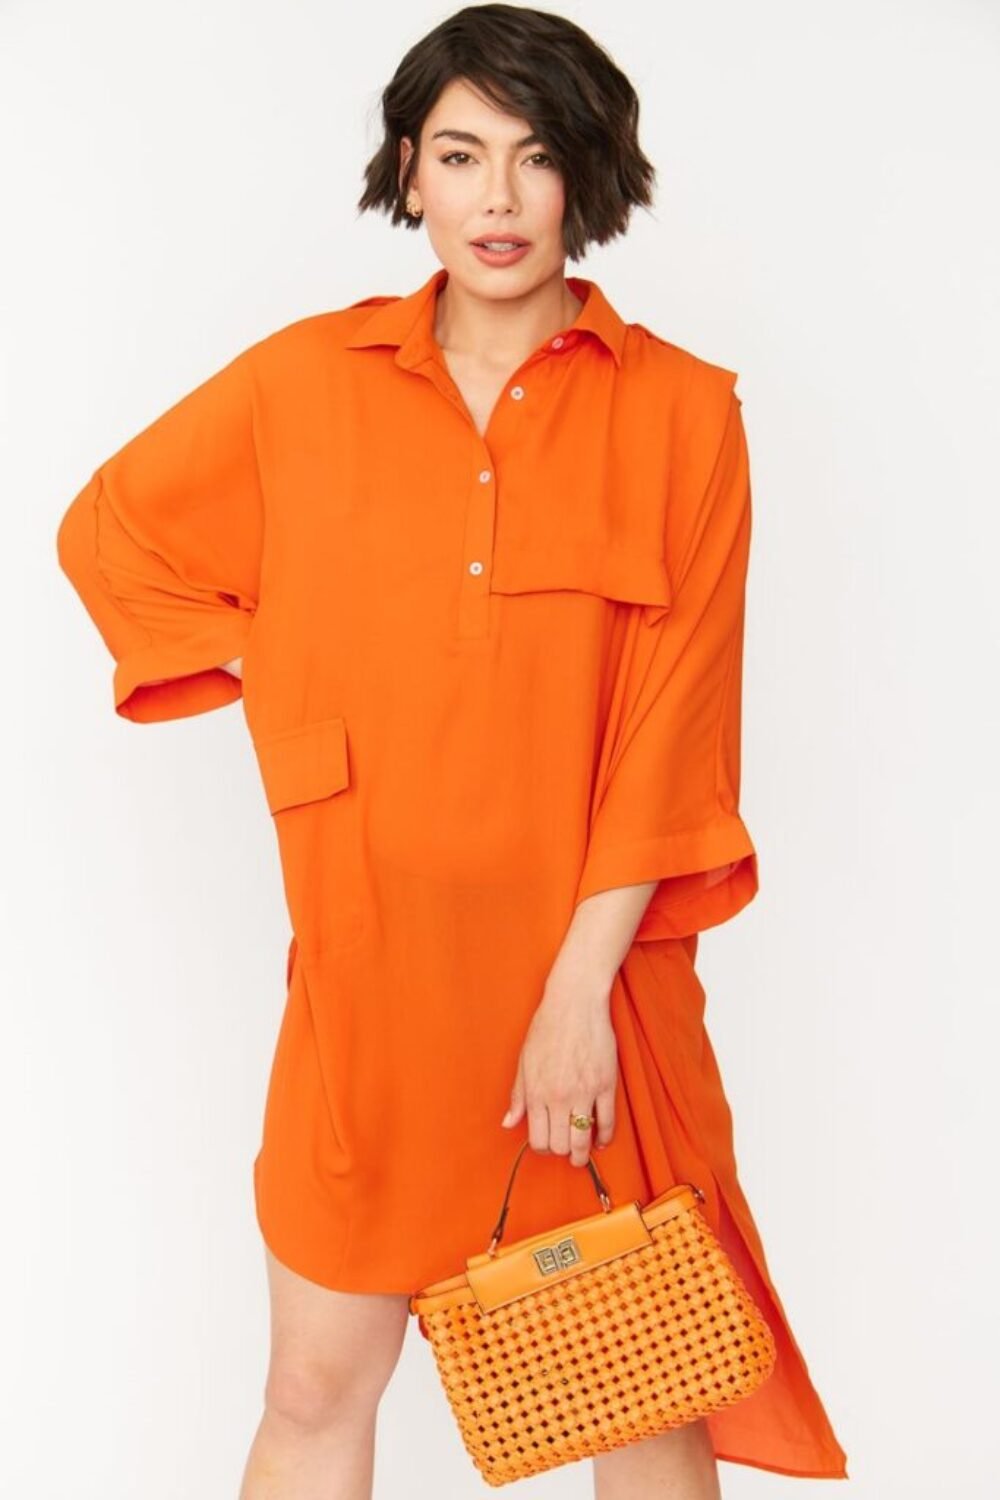 Shop Lux Orange Silk Blend Shirt Dress and women's luxury and designer clothes at www.lux-apparel.co.uk